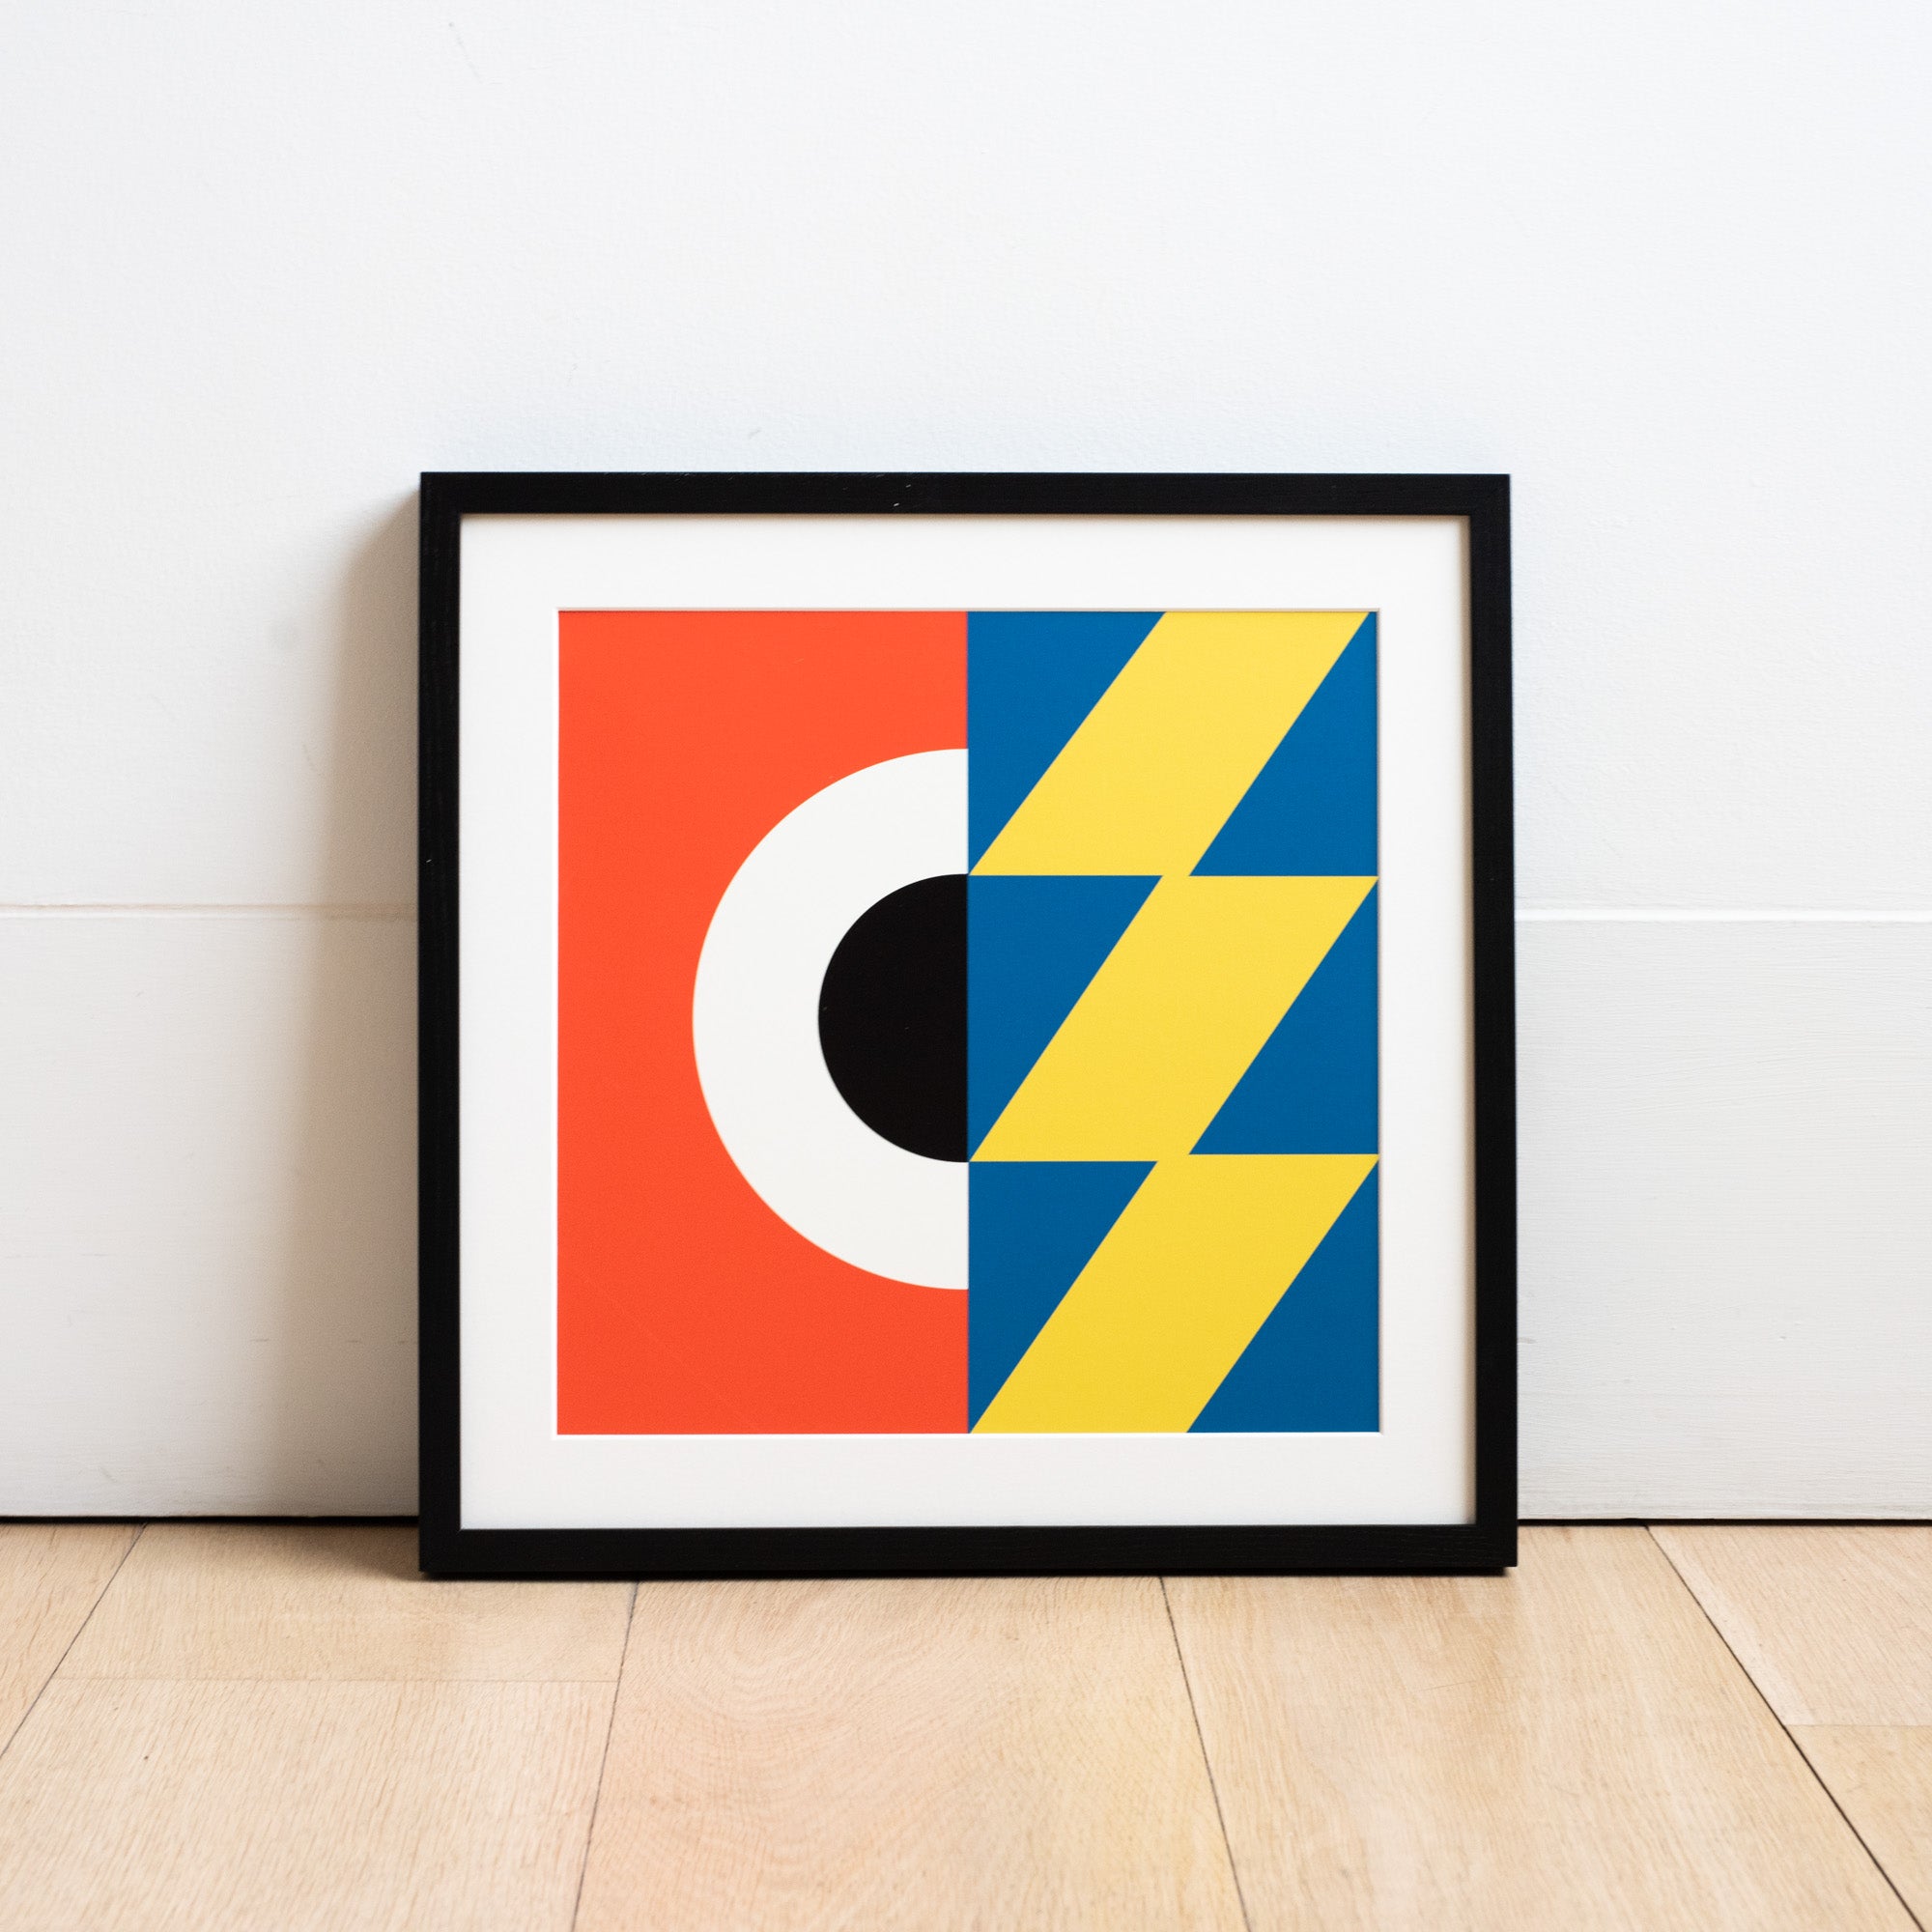 Square geometric digital illustration by Ruth Tuck in a black frame rested against a white wall, in red, white, black, blue and yellow.